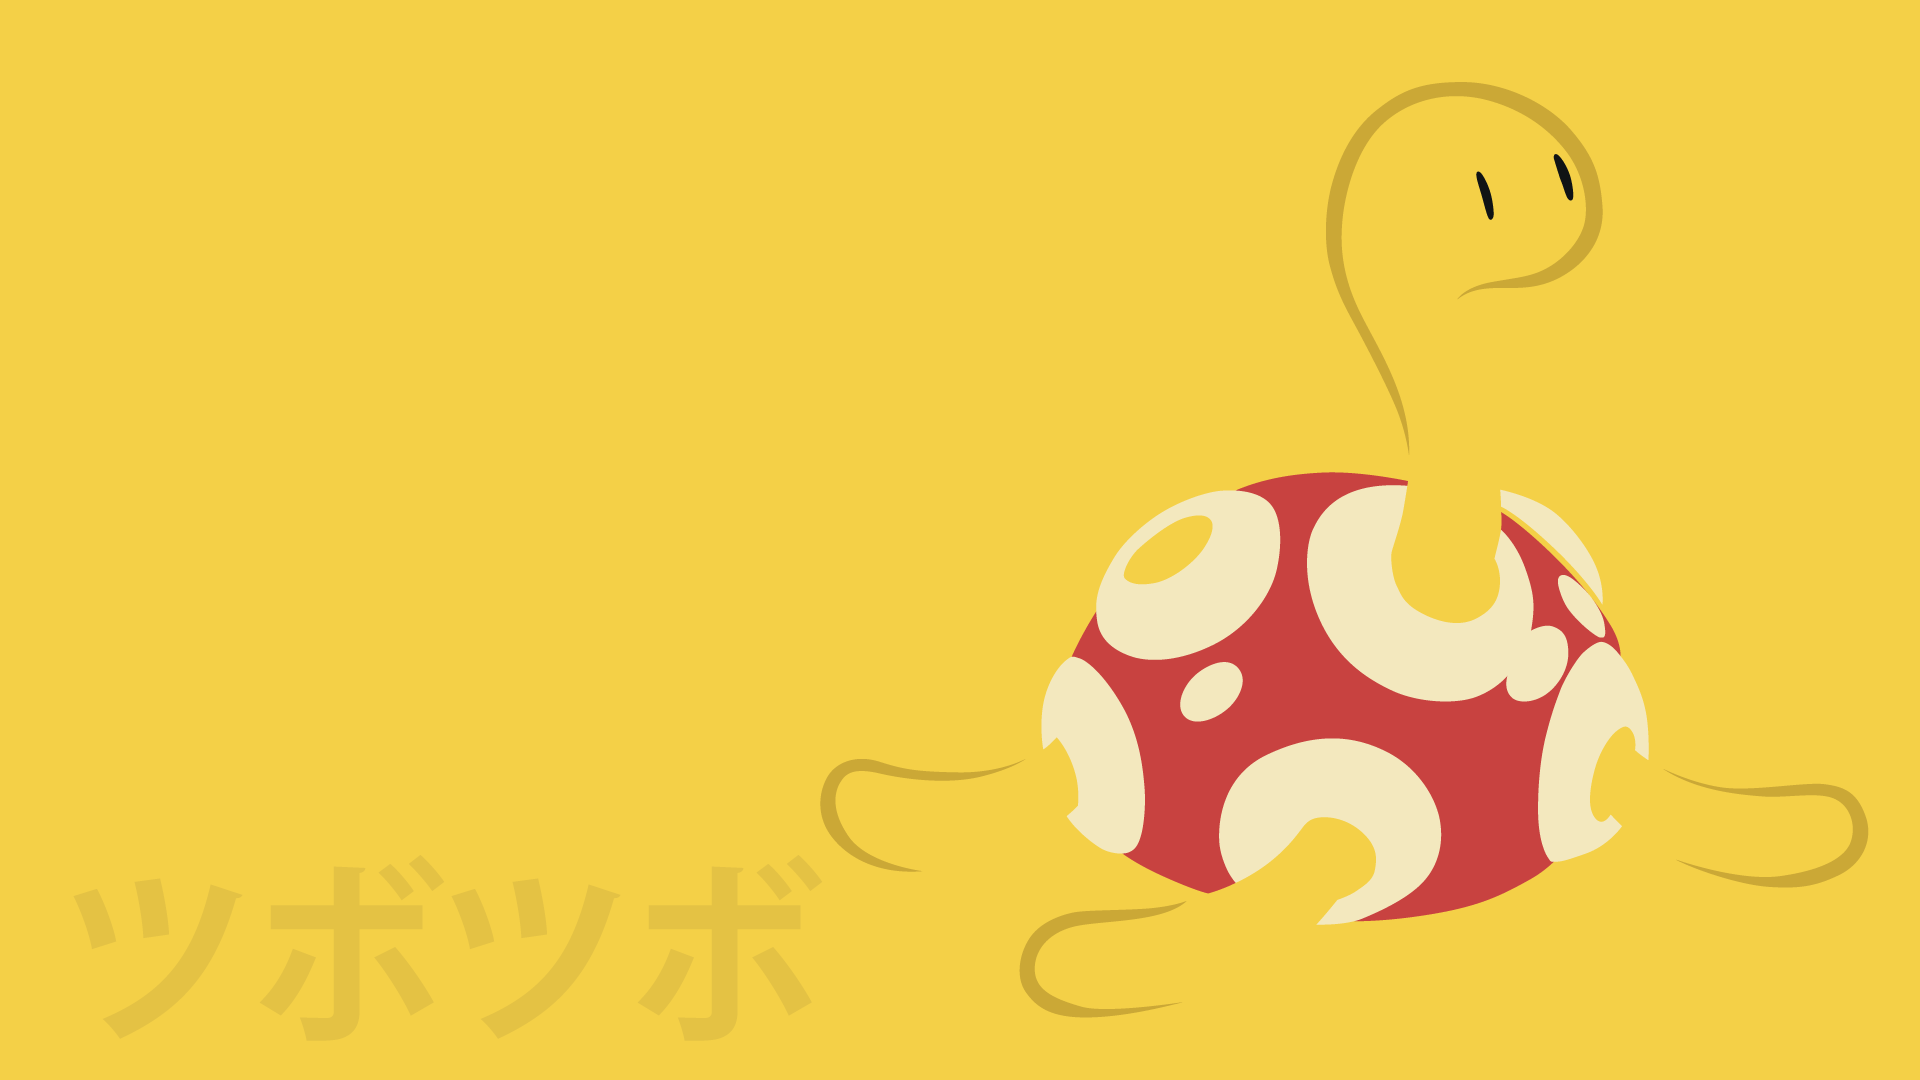 Shuckle Hd Wallpapers